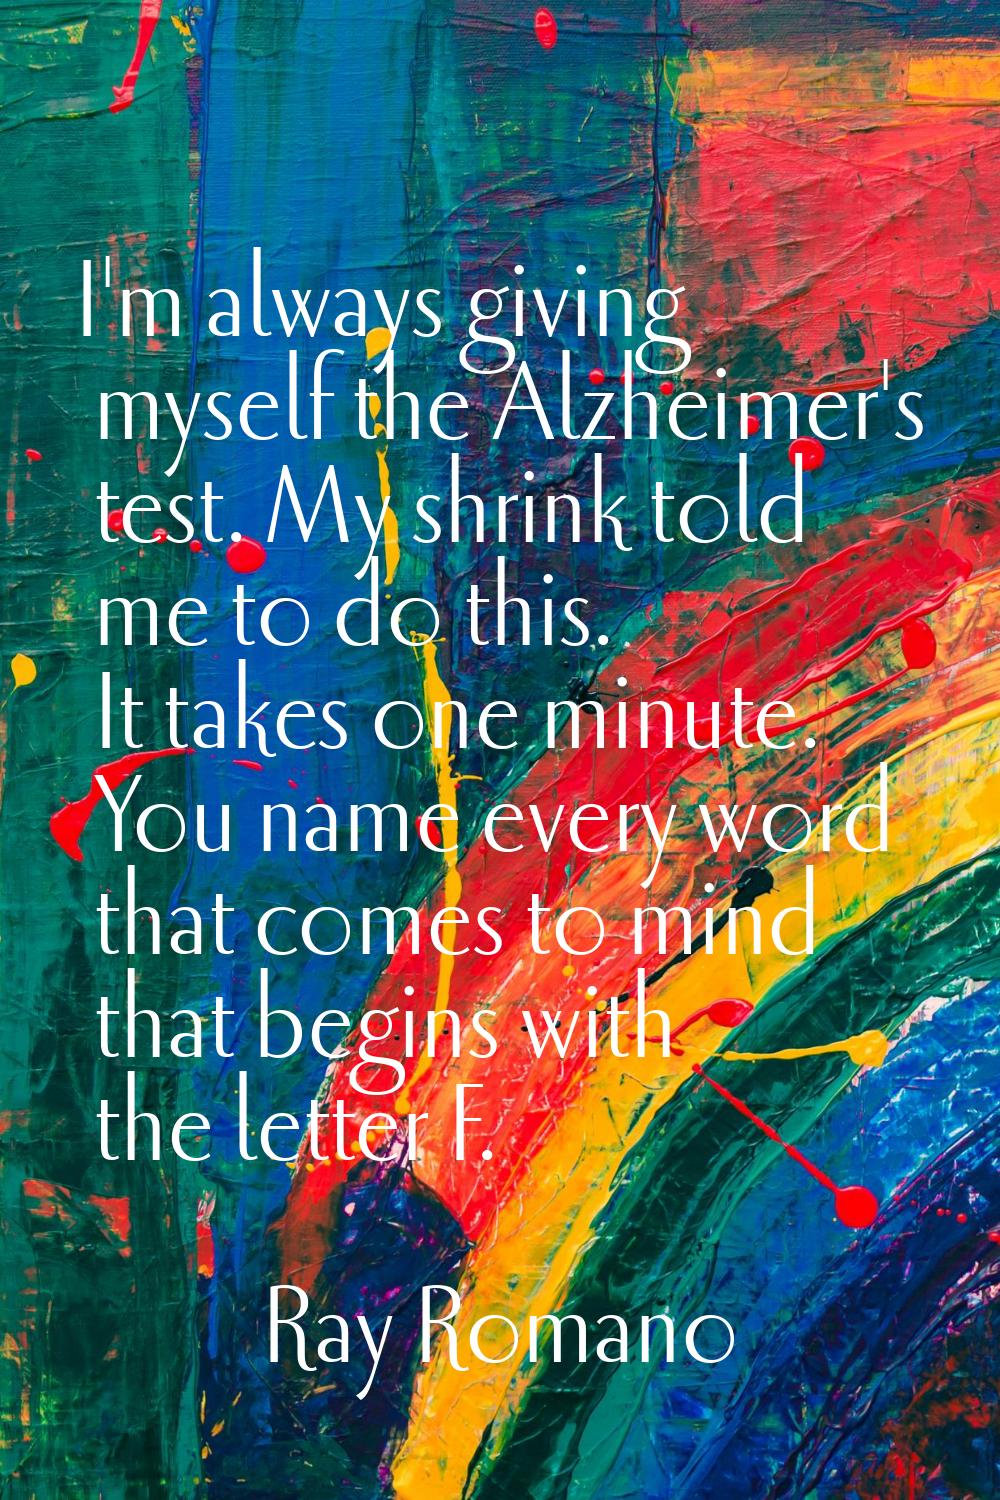 I'm always giving myself the Alzheimer's test. My shrink told me to do this. It takes one minute. Y